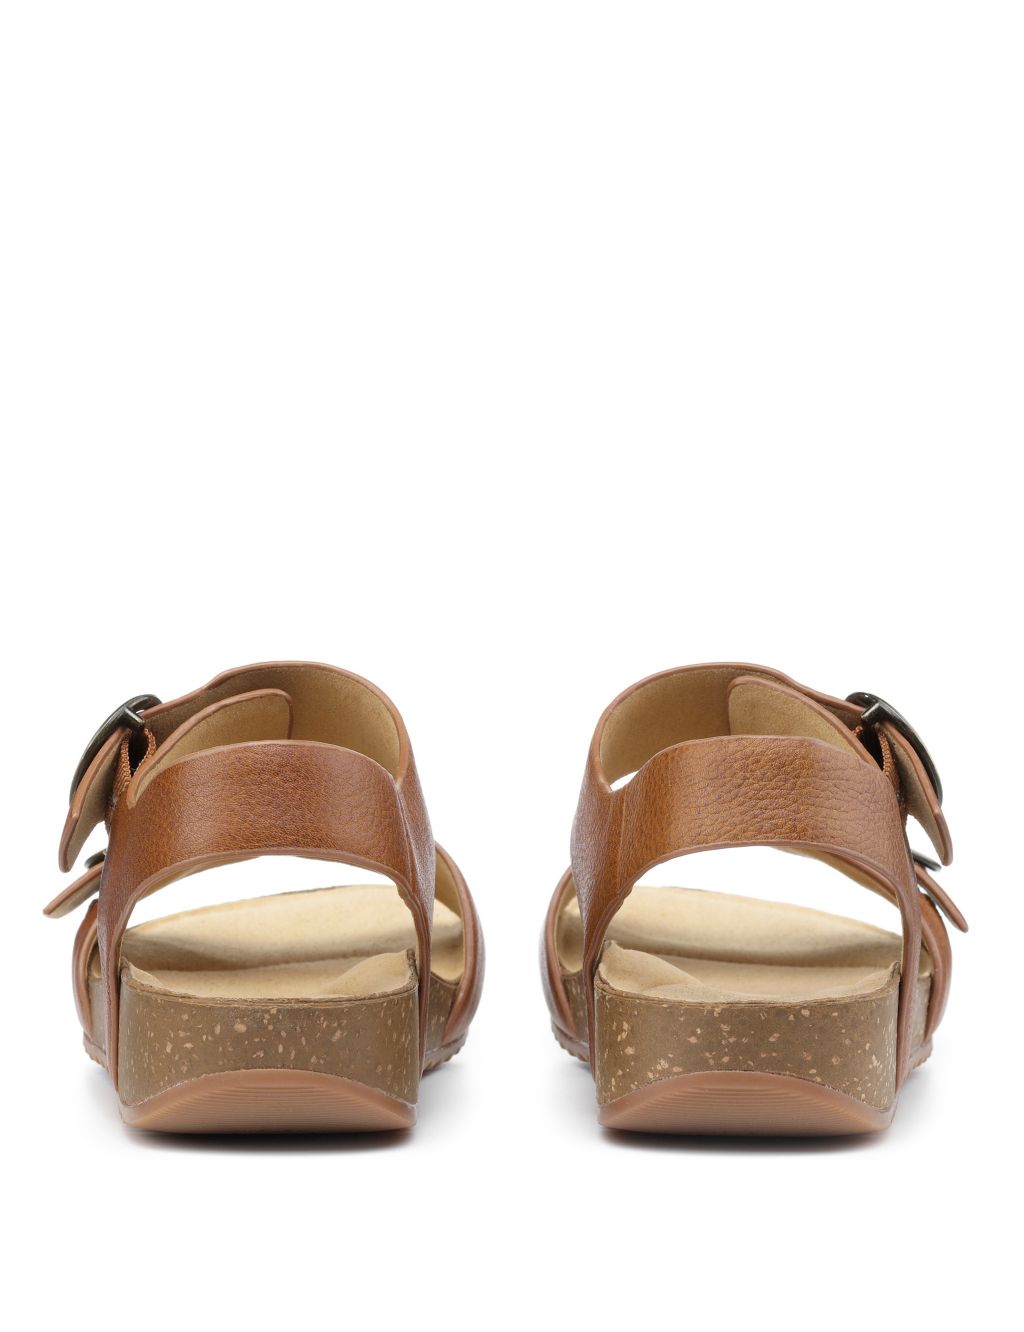 Tourist Wide Fit Leather Wedge Sandals image 4